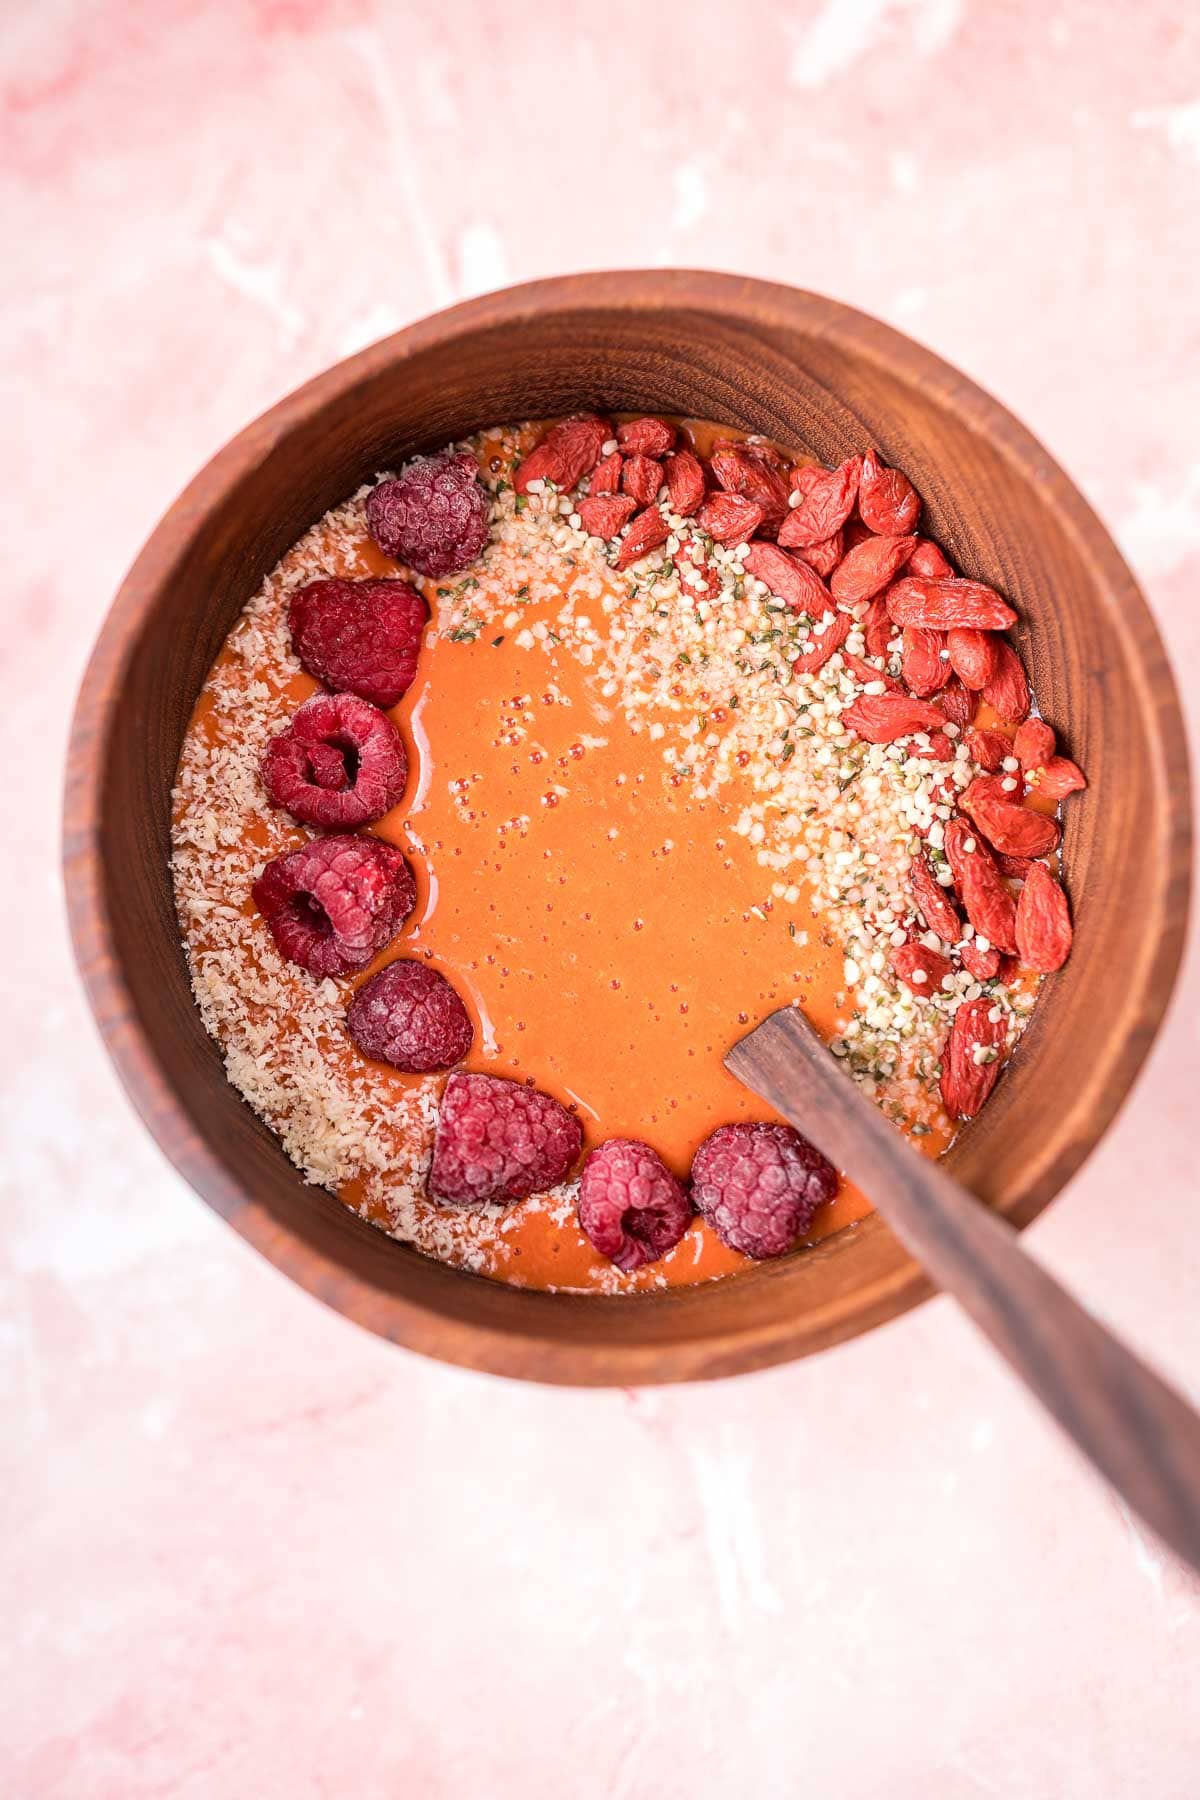 Top view of a wooden bowl filled with a dark orange smoothie topped with fruit and seeds.